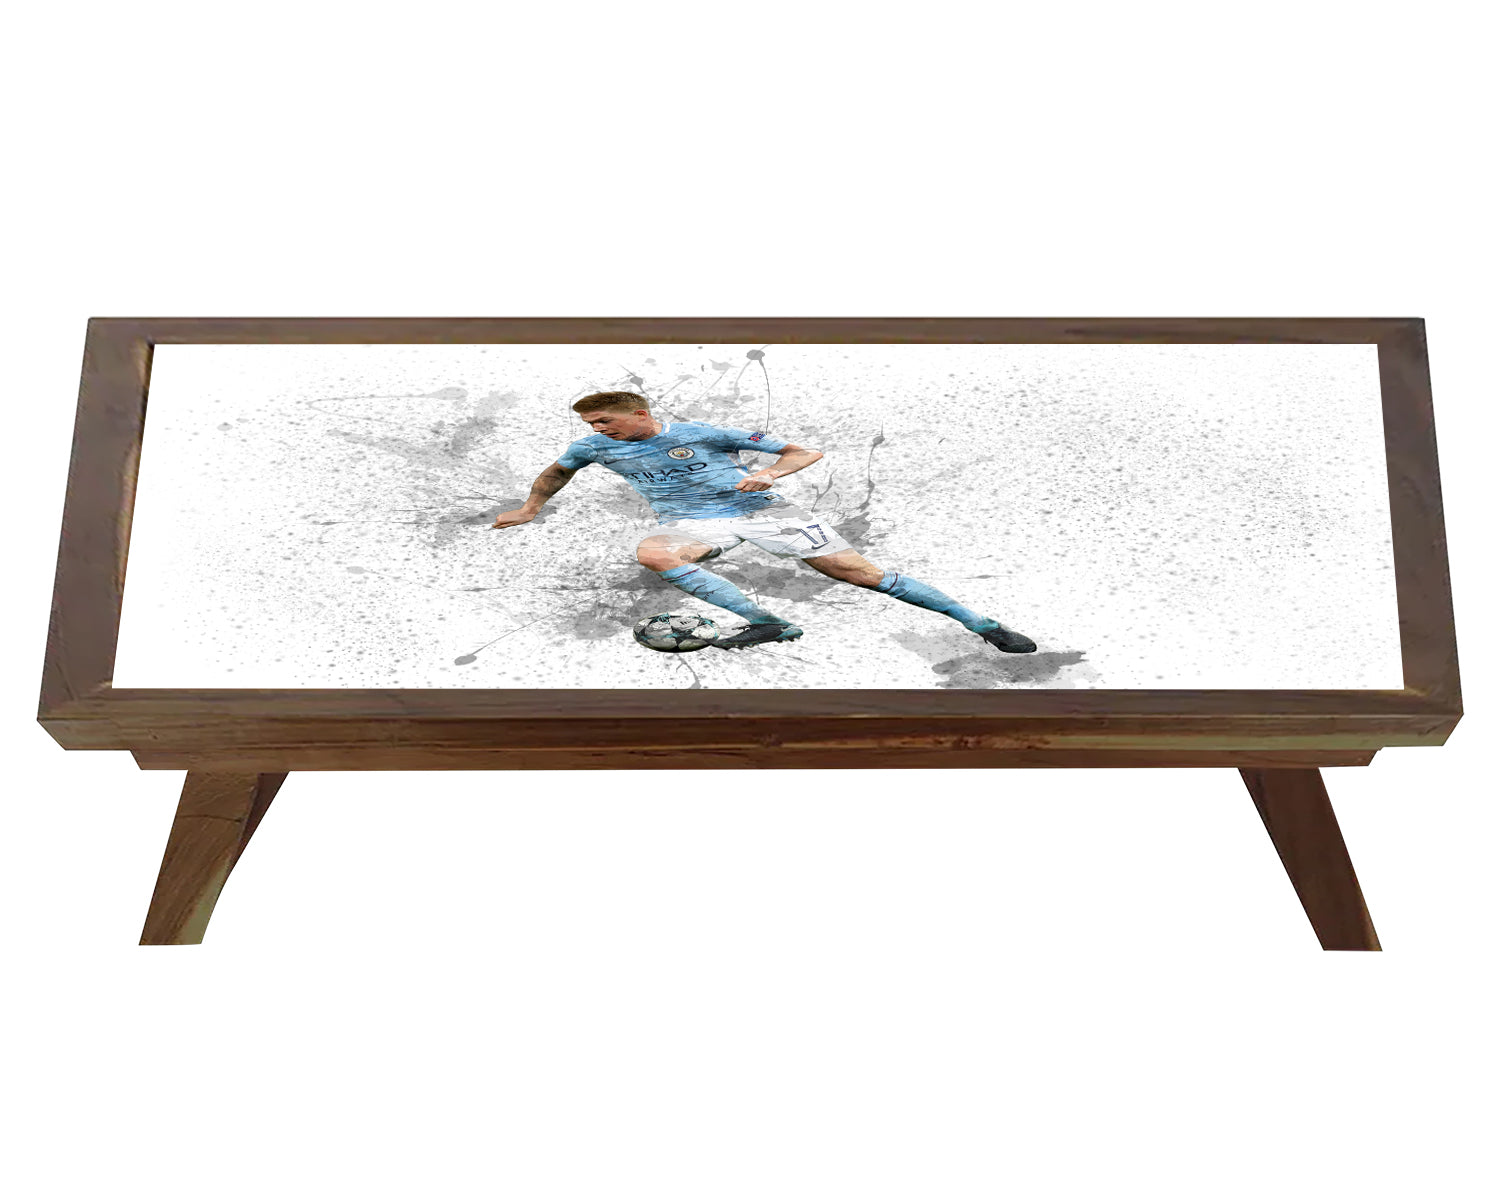 Kevin De Bruyne Splash Effect Coffee and Laptop Table 